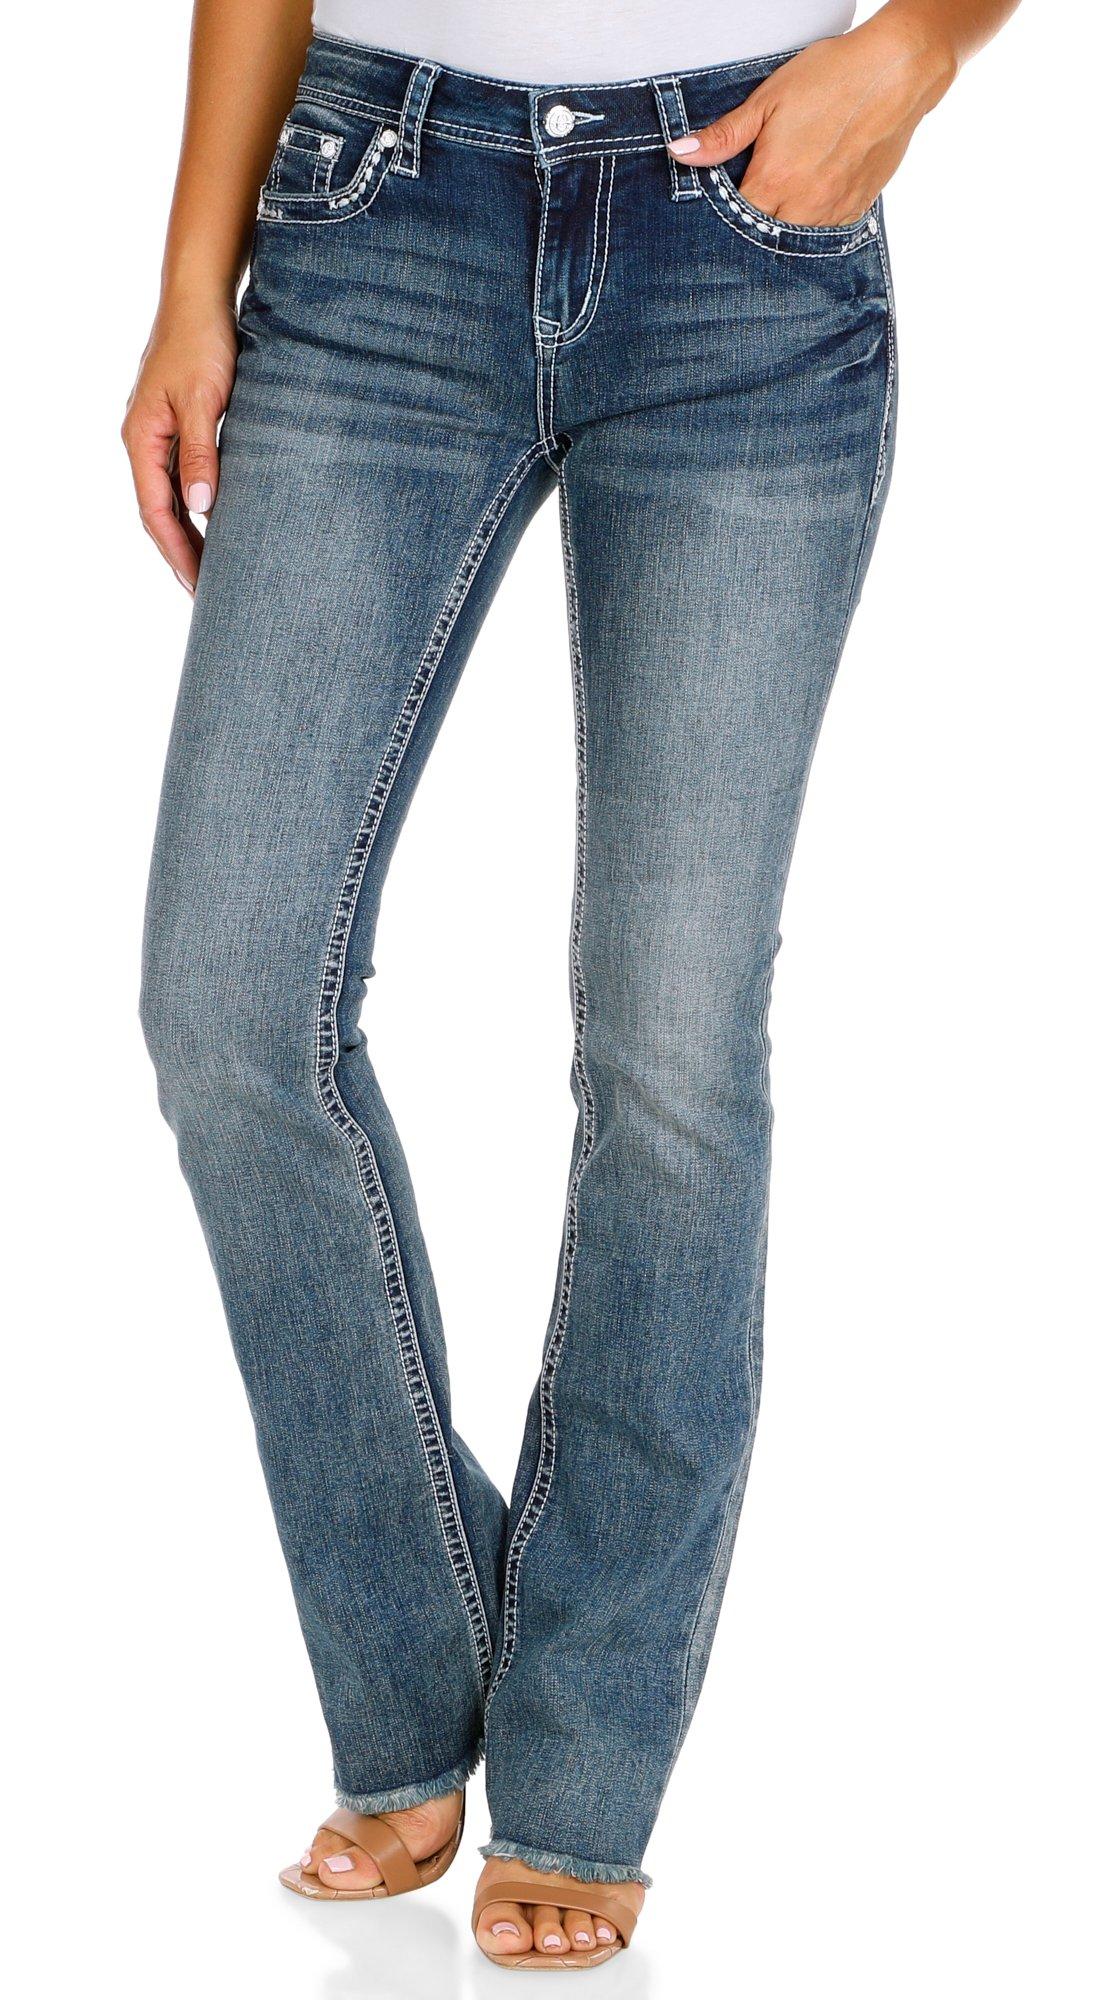 Women's Easy Fit Stitch Boot Cut Jeans